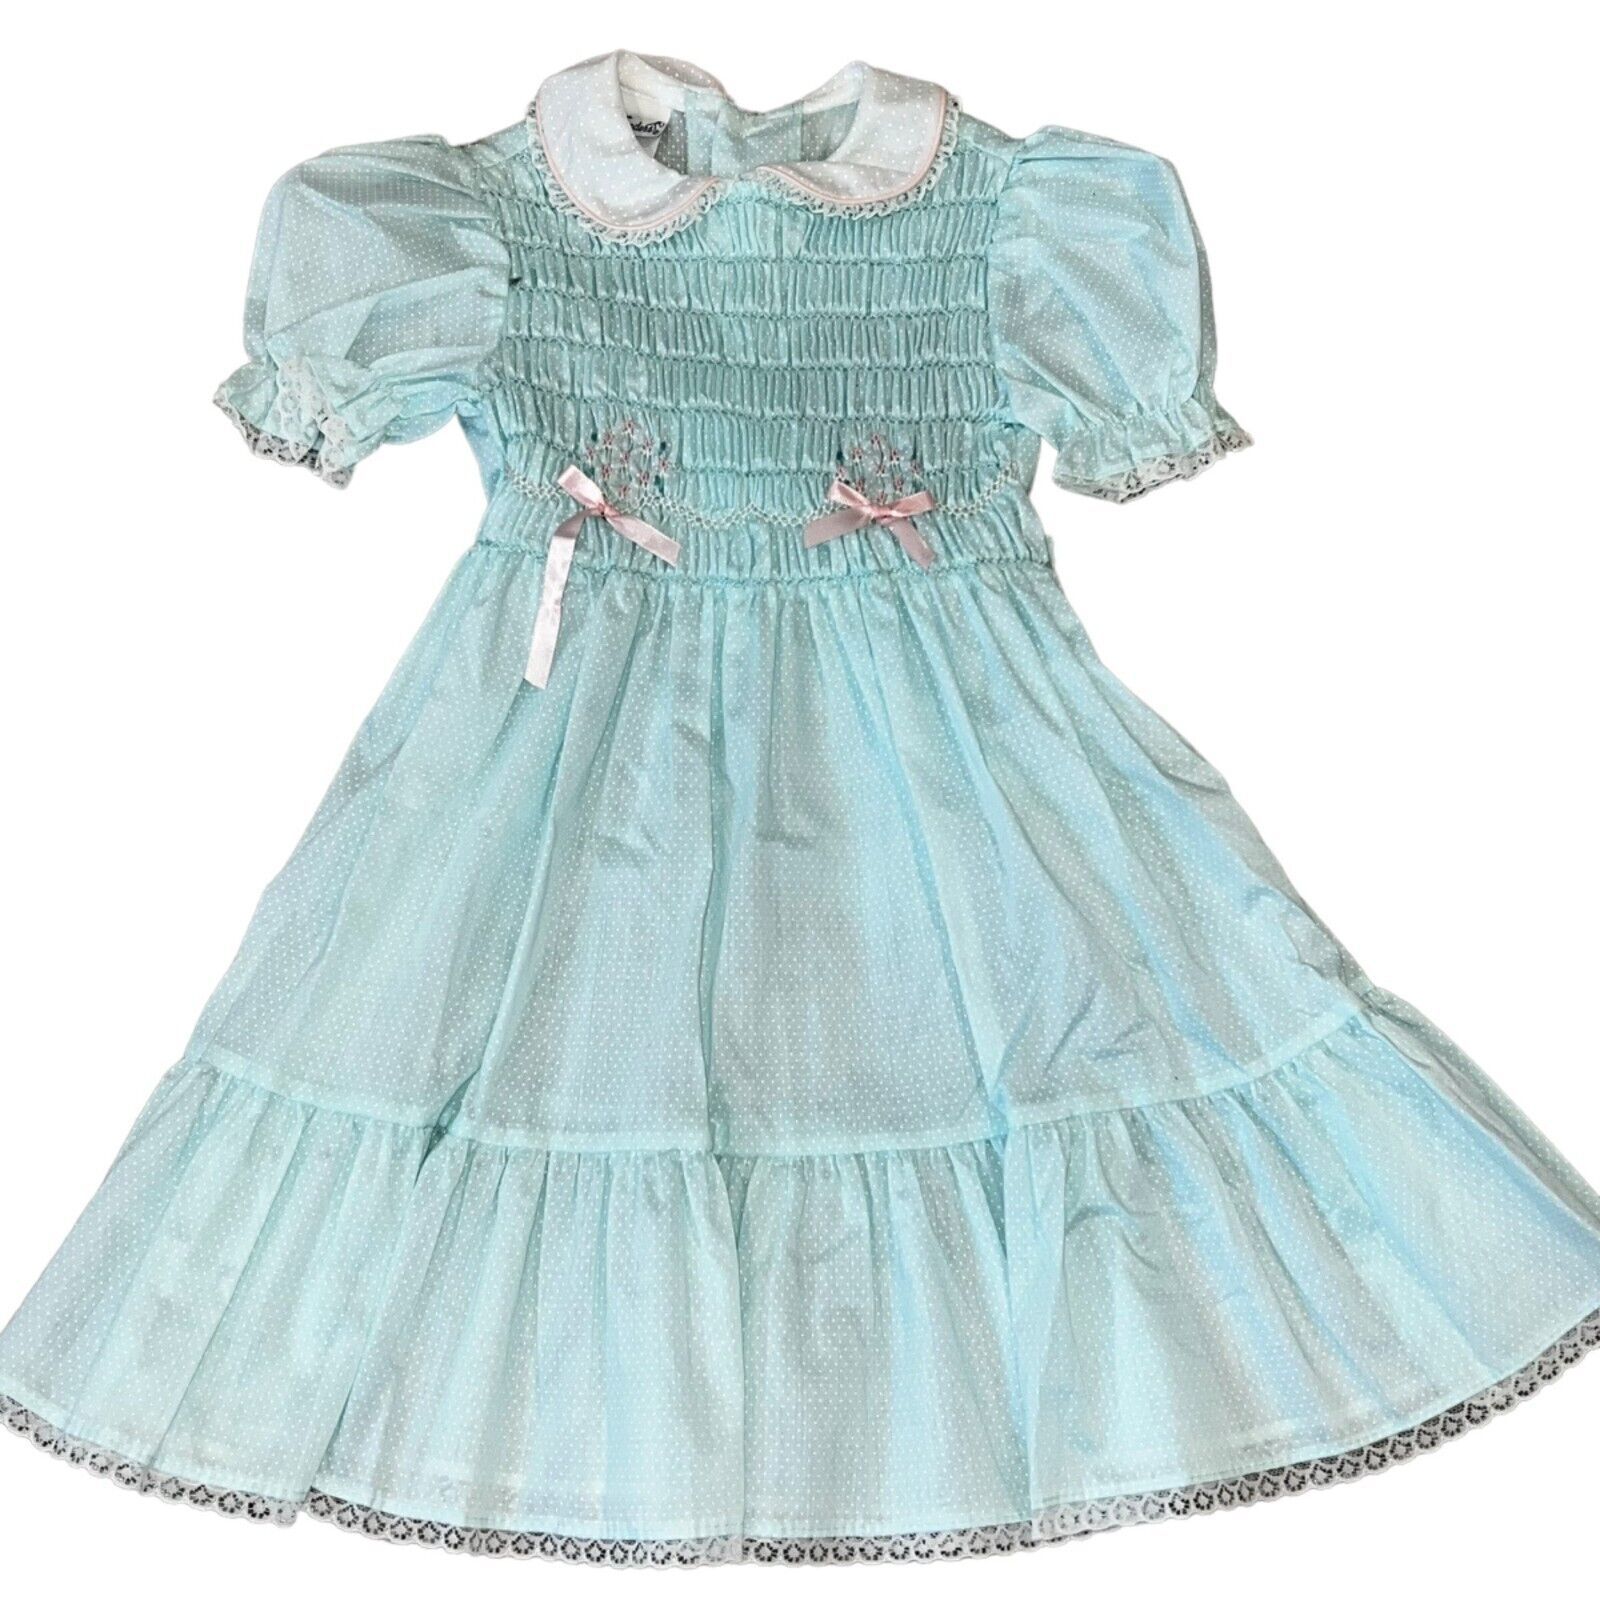 Primary image for Polly Finders Vintage Hand Smocked Aqua Blue Polka Dot Lace Collar Dress Size 6